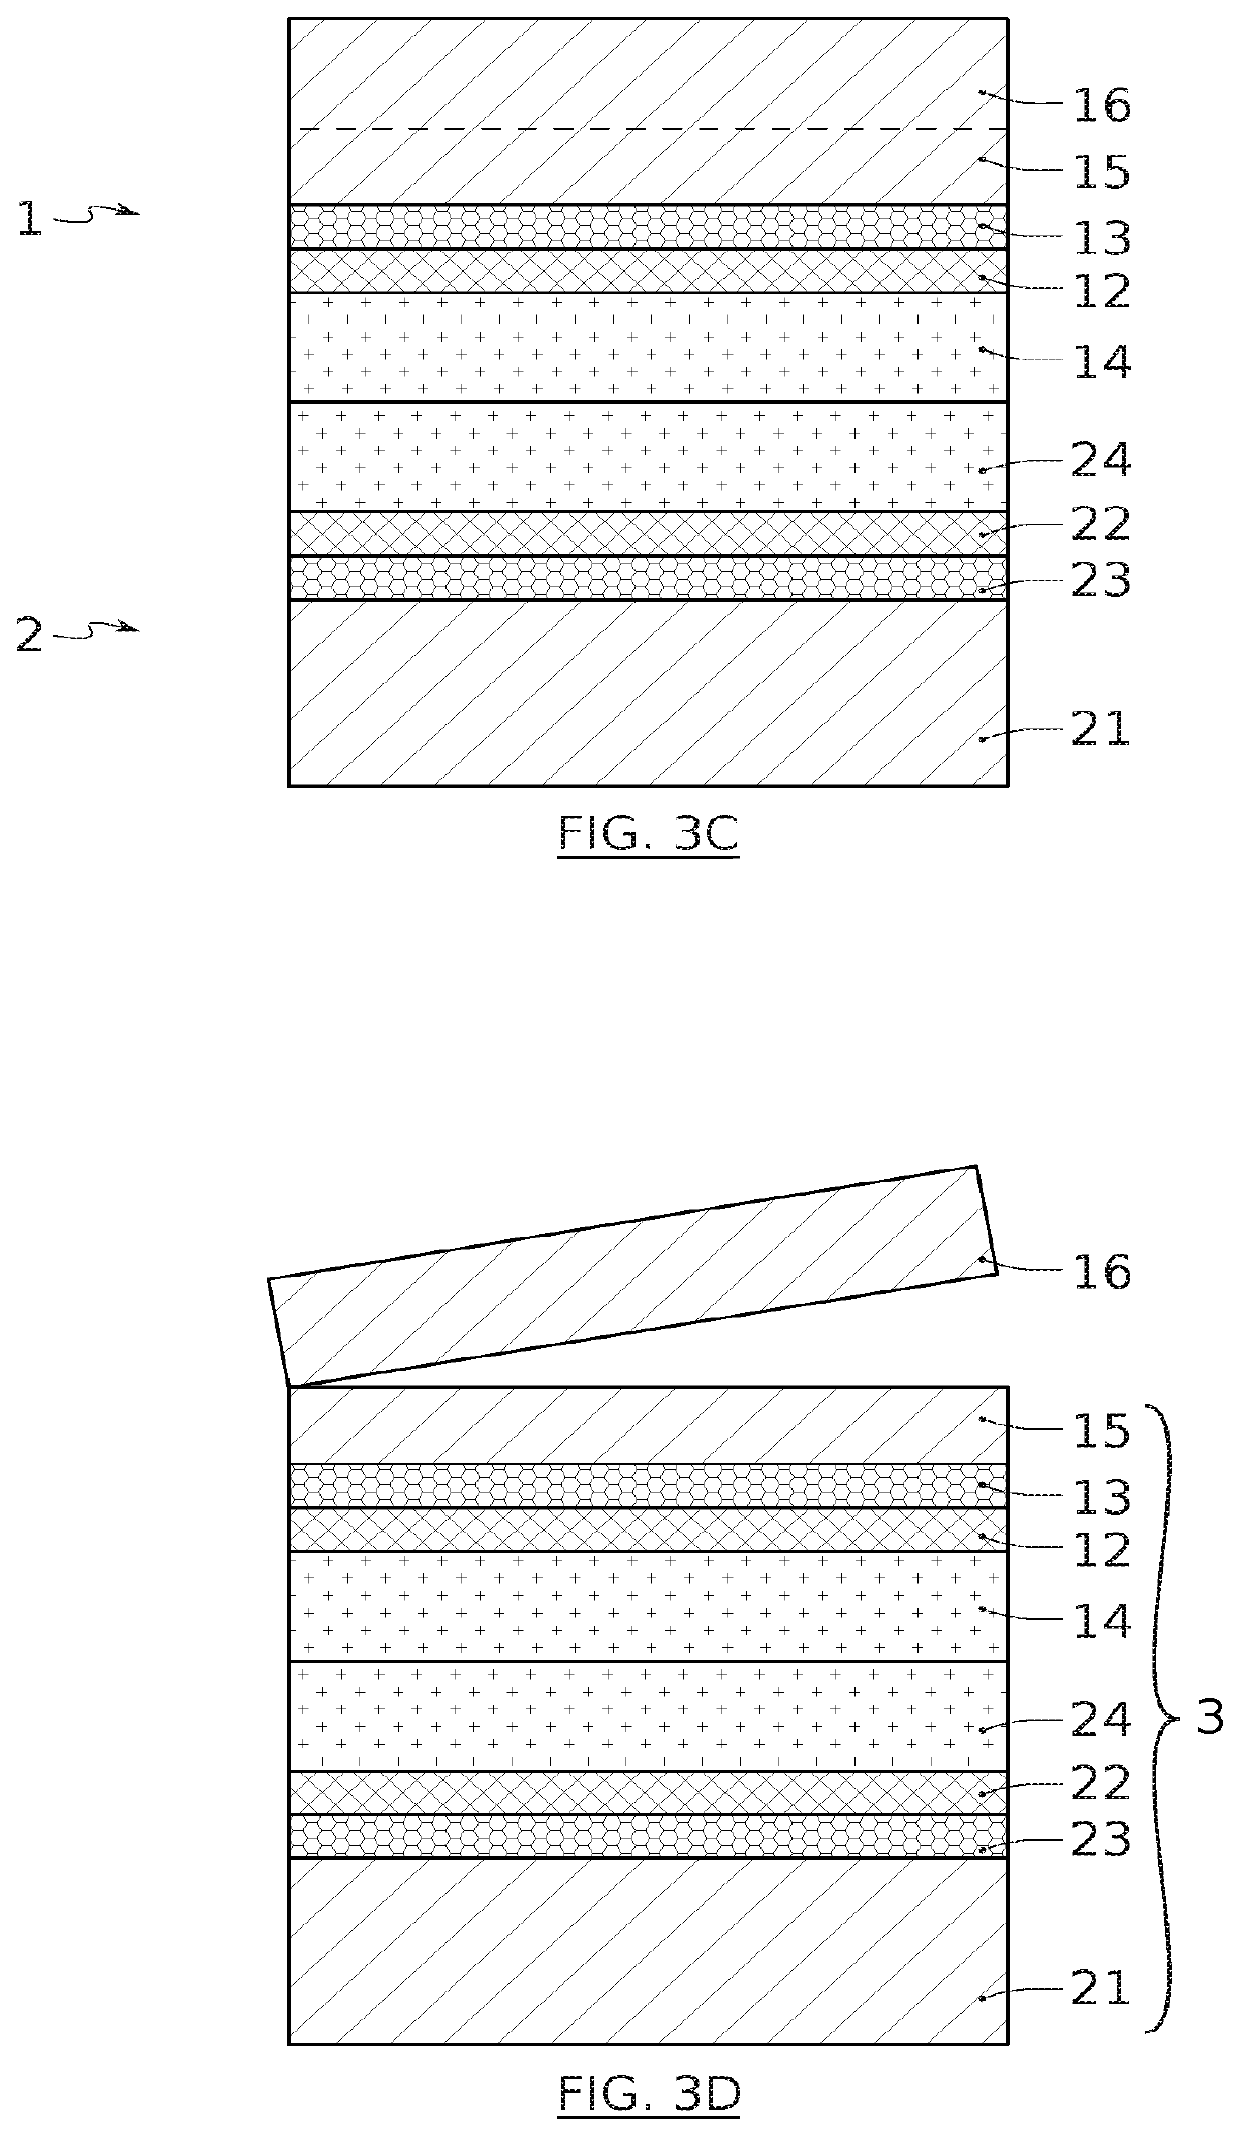 Method of manufacturing an electronic device